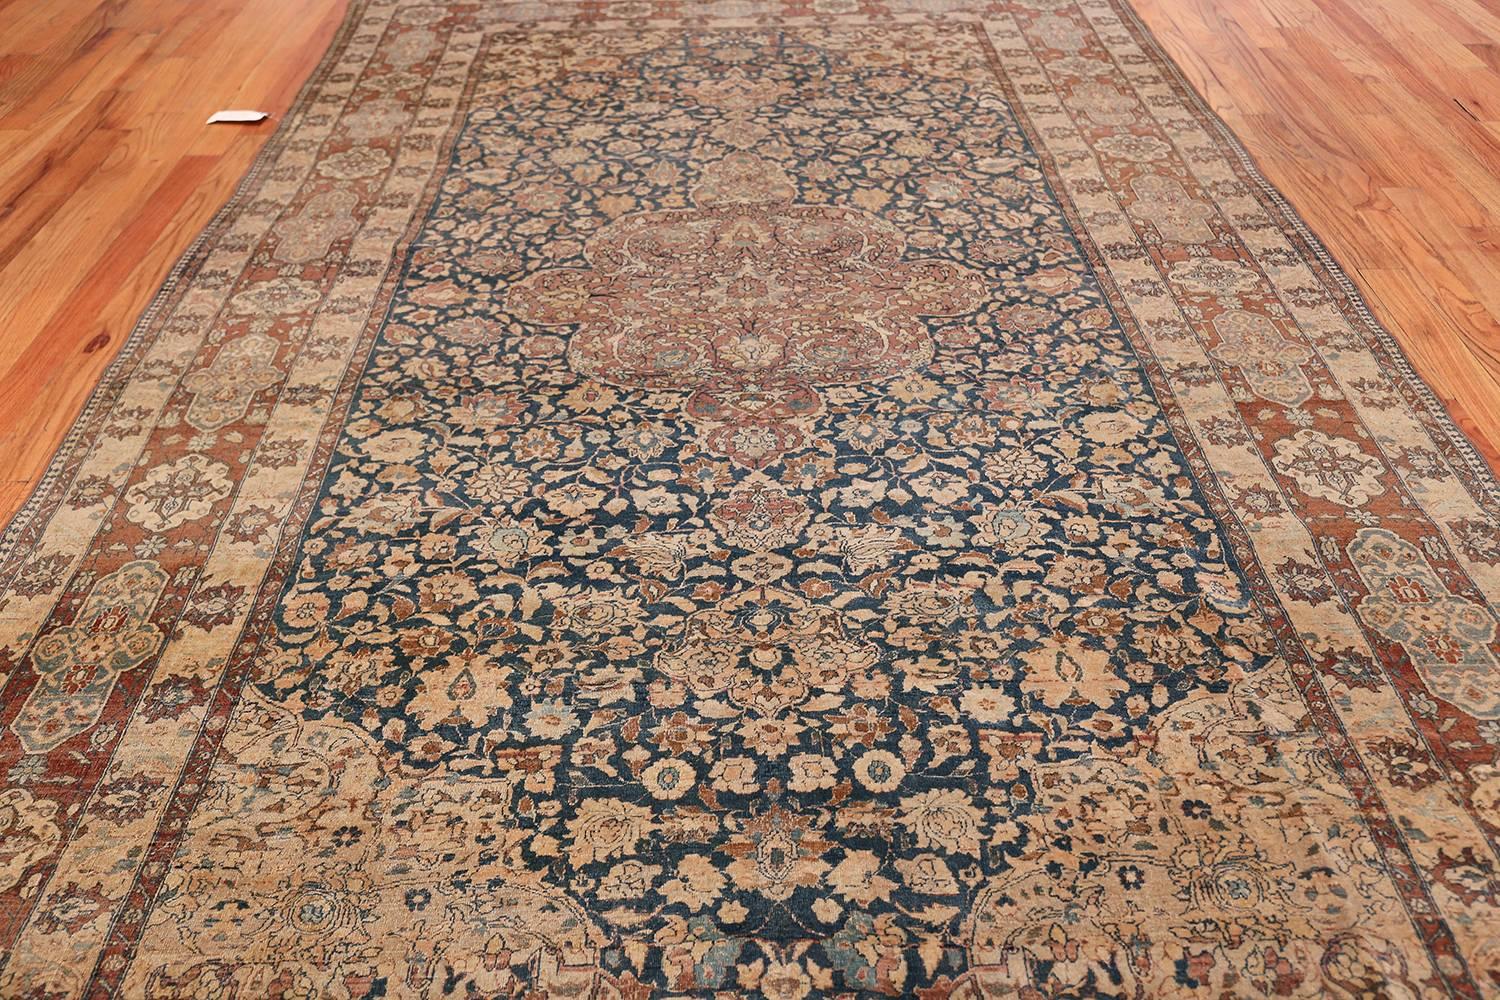 Blue Room Size Antique Persian Isfahan Rug. Size: 7 ft x 11 ft 8 in 5